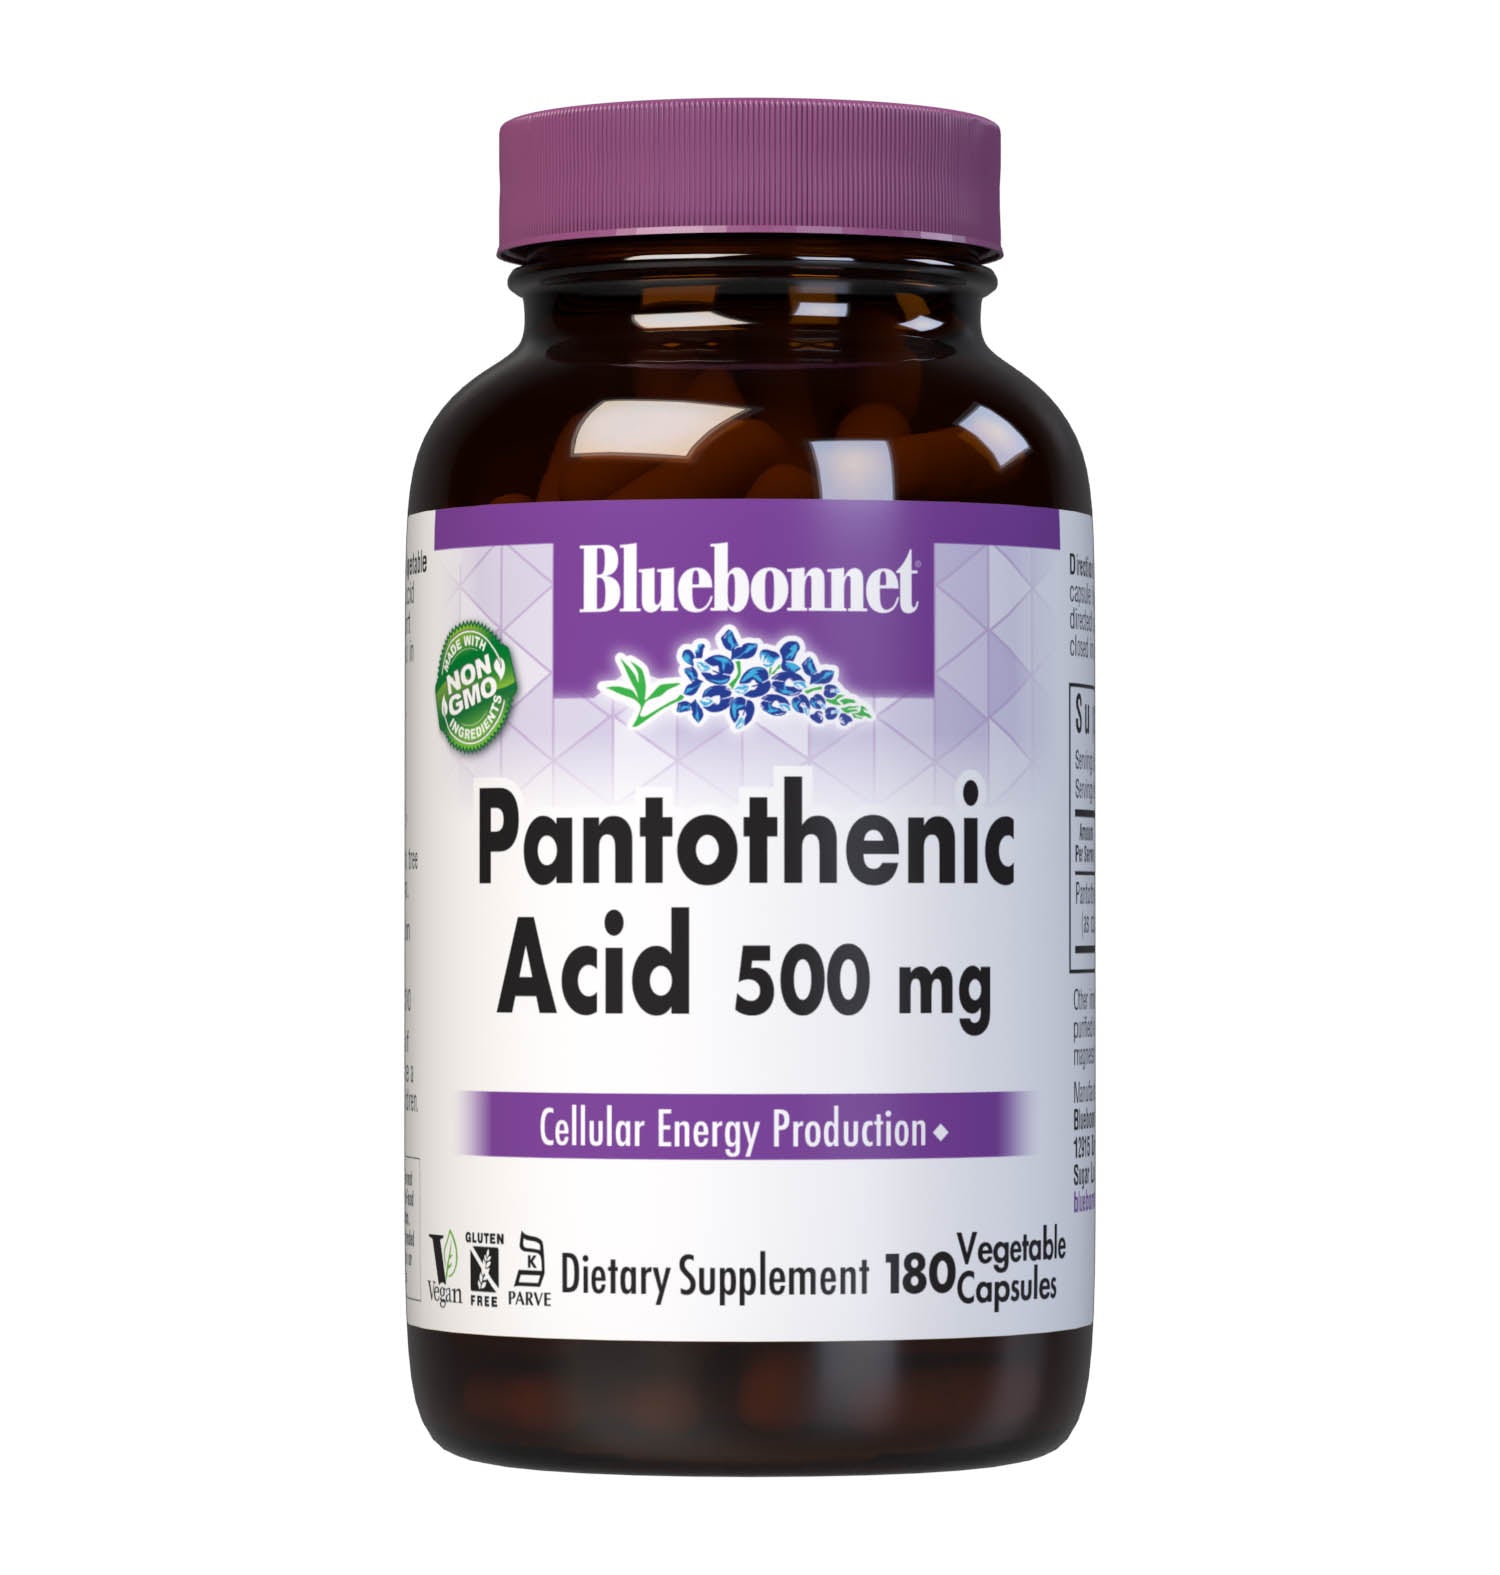 Bluebonnet’s Pantothenic Acid 500 mg 180 Vegetable Capsules are formulated with pantothenic acid from calcium D-pantothenate. Tested for potency and purity in our own state-of-the-art laboratory. Pantothenic acid may support cellular energy production. #size_180 count